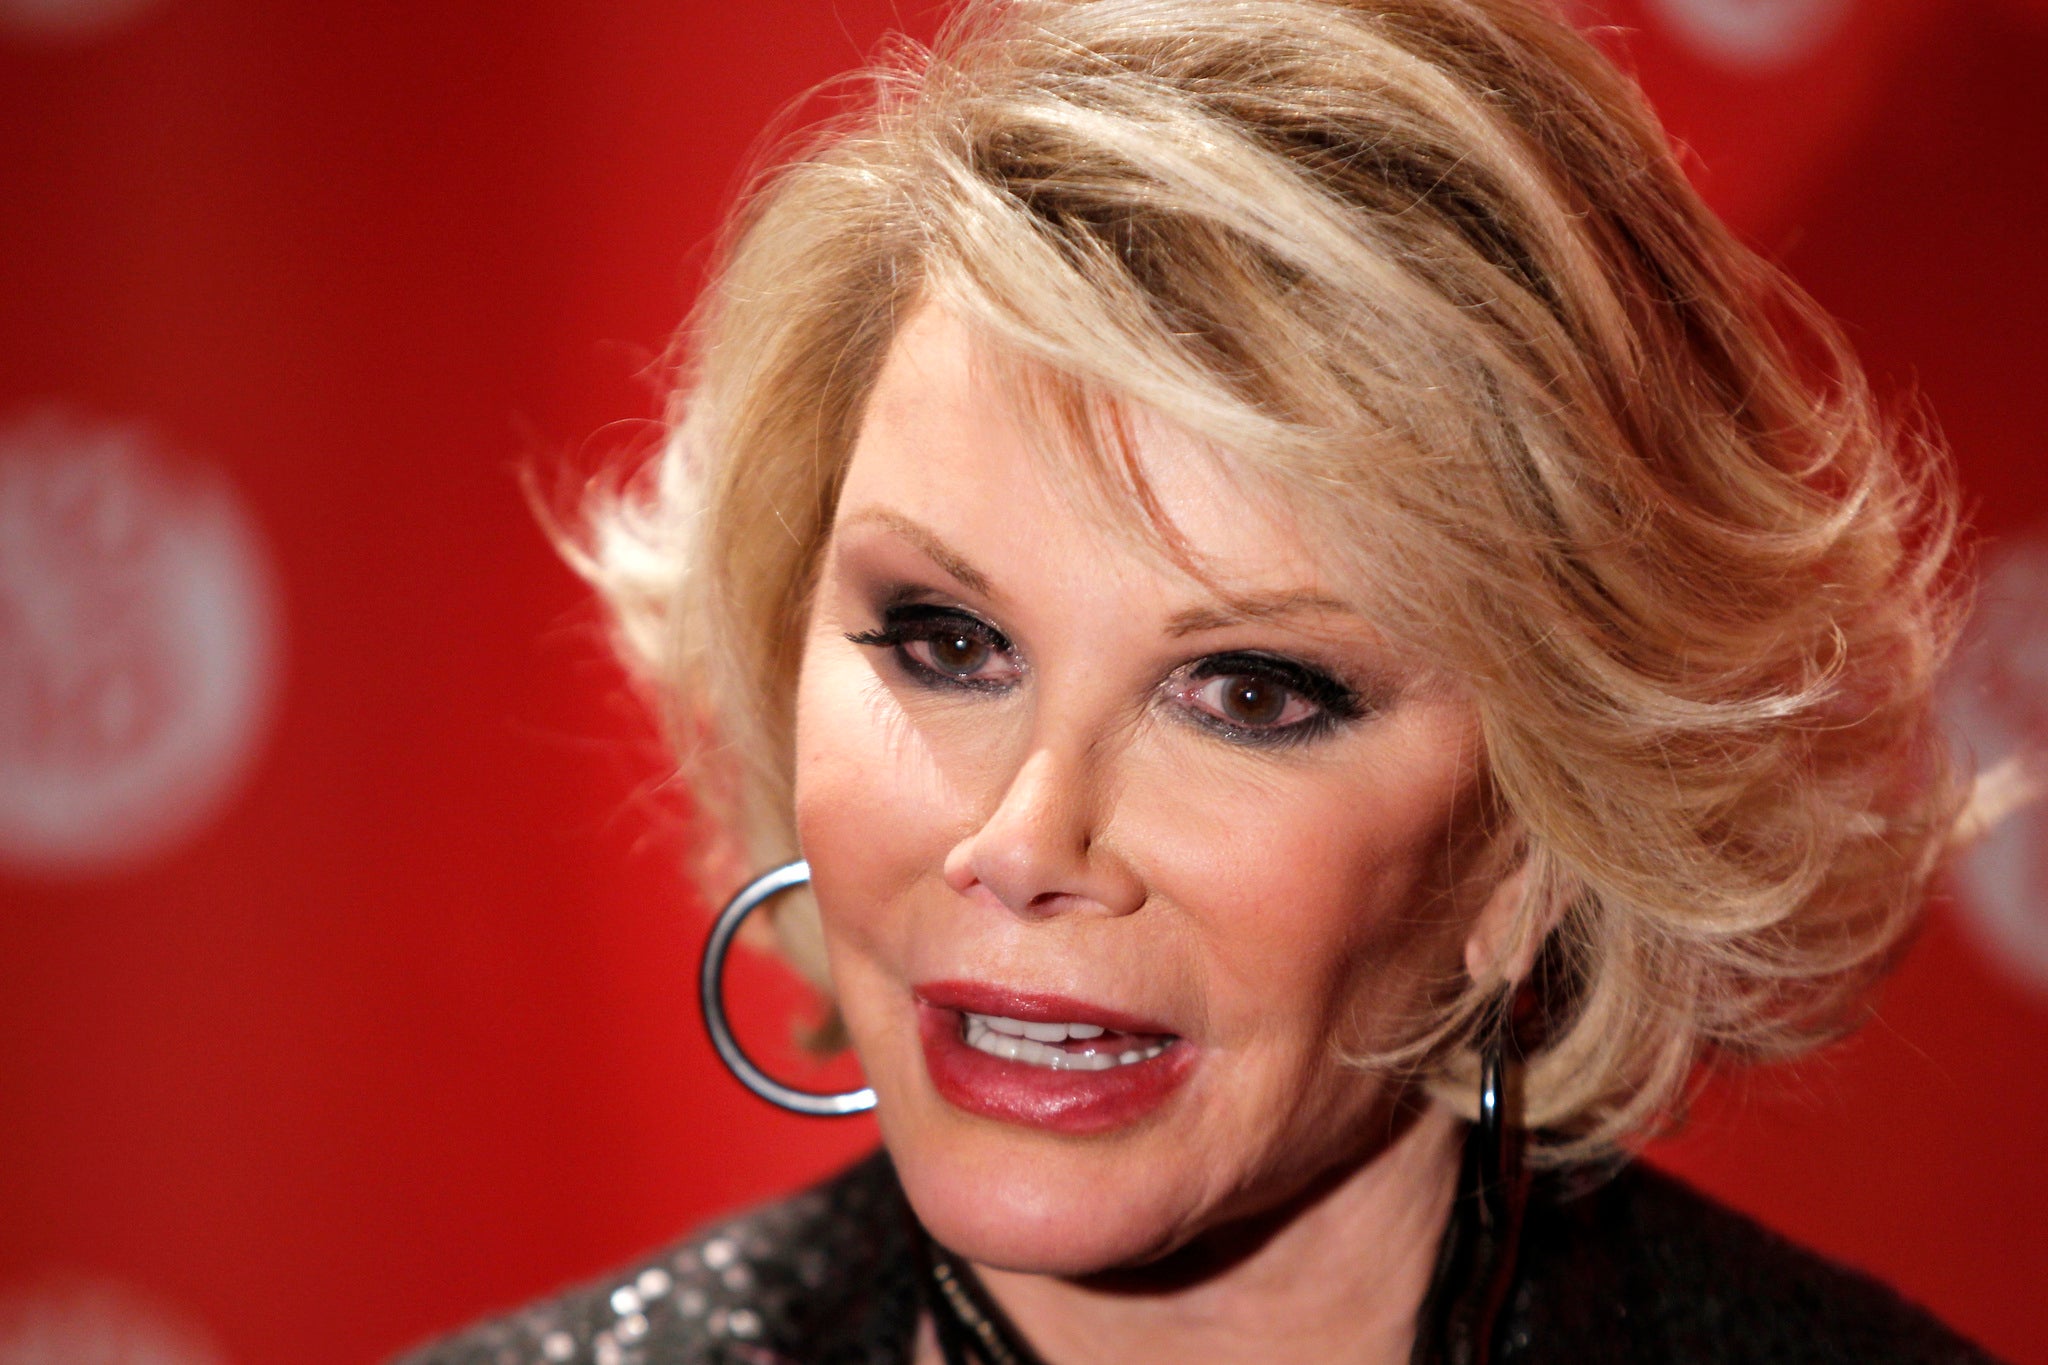 Joan Rivers has reportedly been hospitalised after she stopped breathing during surgery